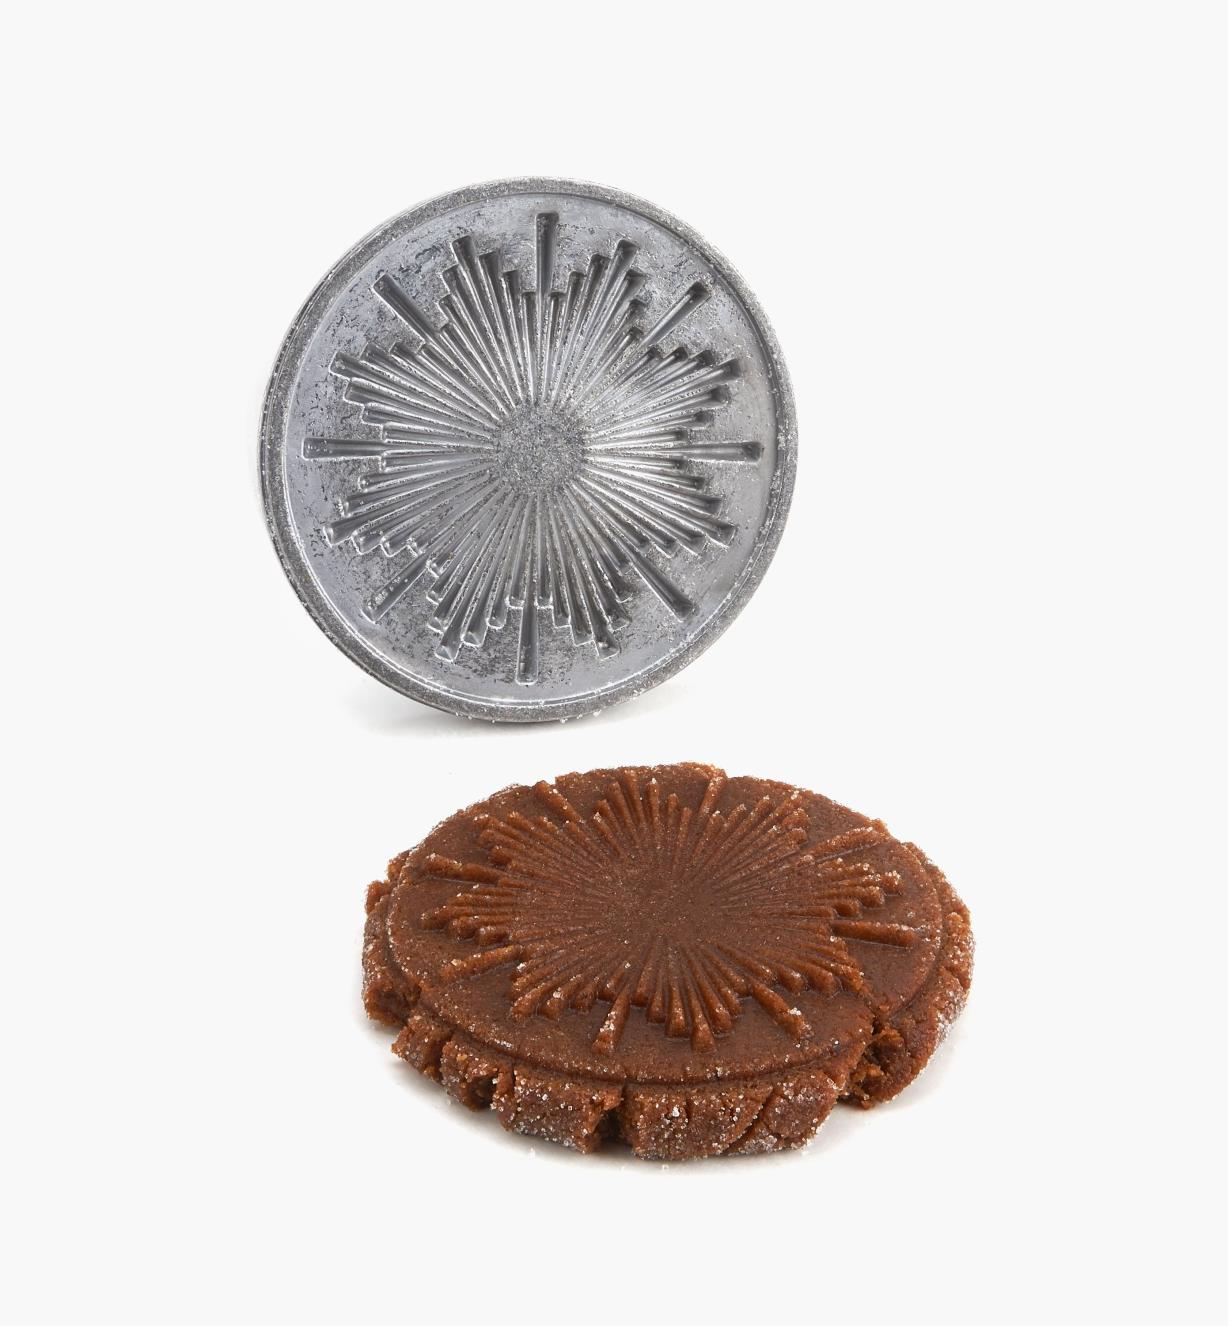 Sunburst stamp next to a cookie with the design stamped on it